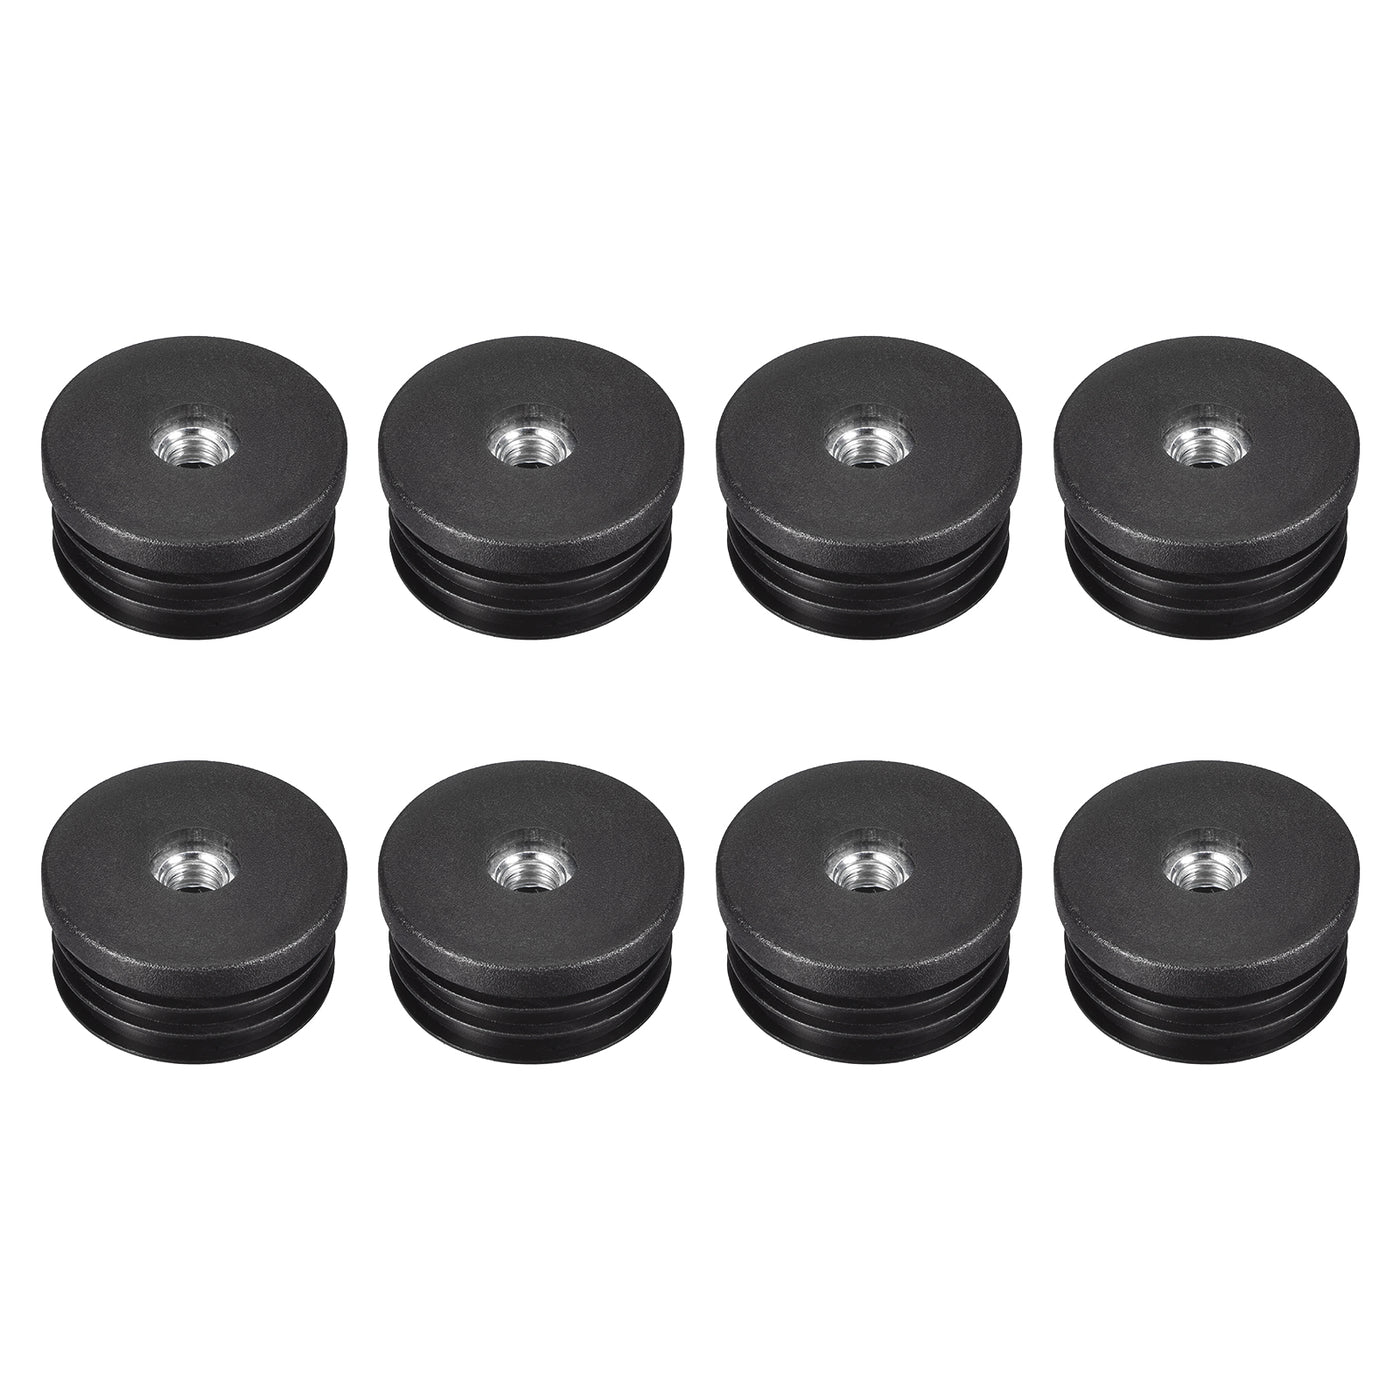 uxcell Uxcell 8Pcs 38mm/1.5" Caster Insert with Thread, Round M8 Thread for Furniture